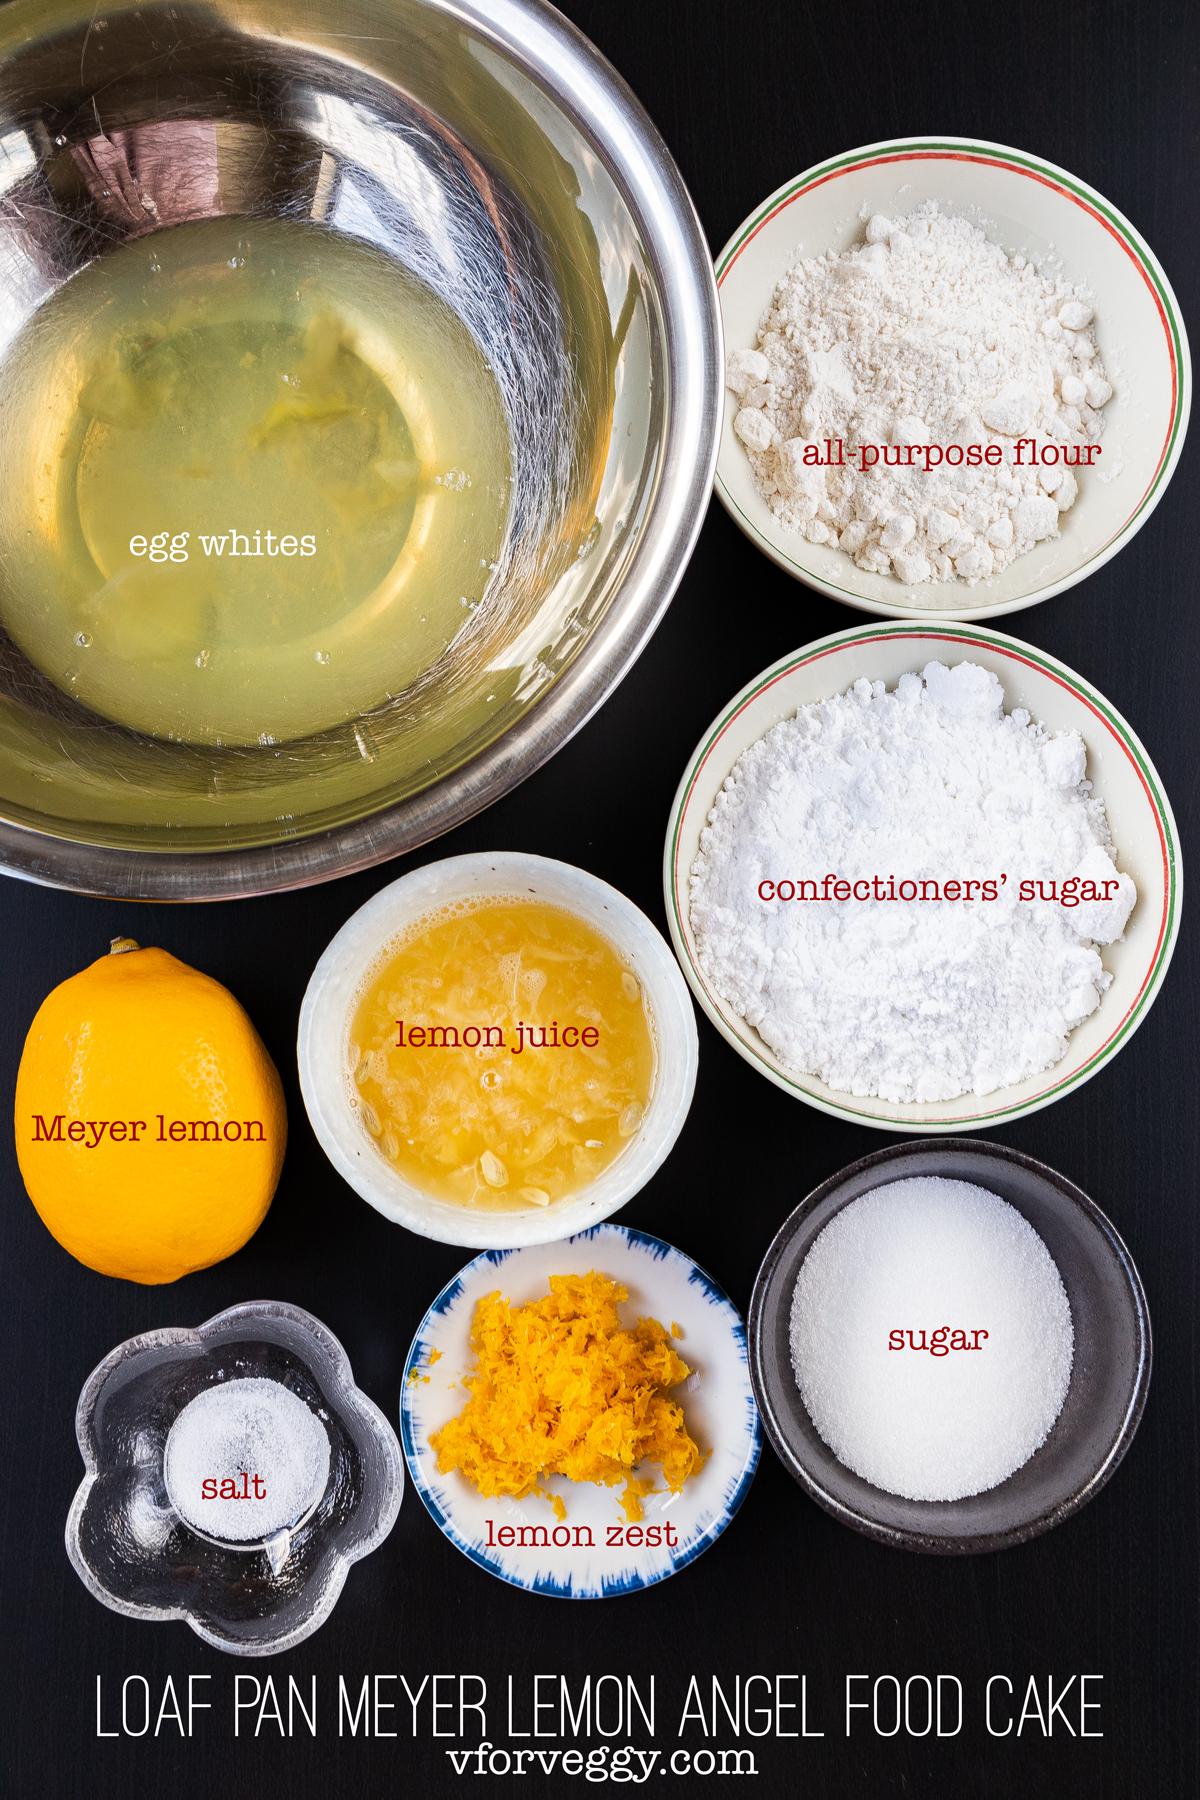 Ingredients for Meyer lemon angel food cake: egg whites, all-purpose flour, confectioners' sugar, Meyer lemon juice, freshly grated Meyer lemon zest, salt, and sugar.